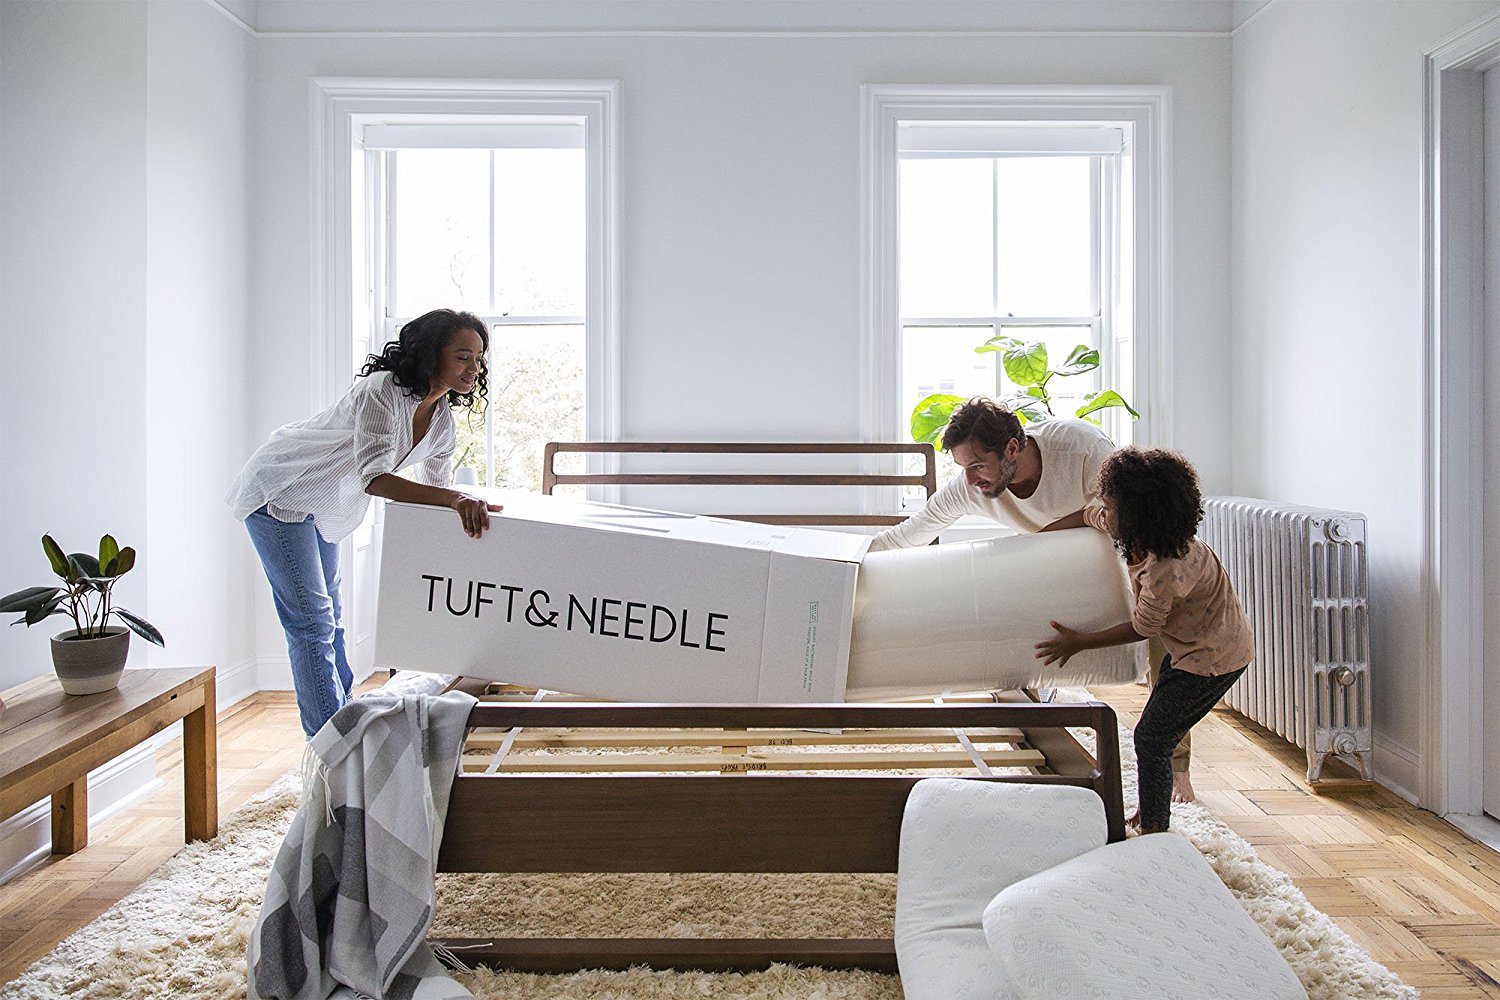 Tuft and Needle on a slatted bed frame